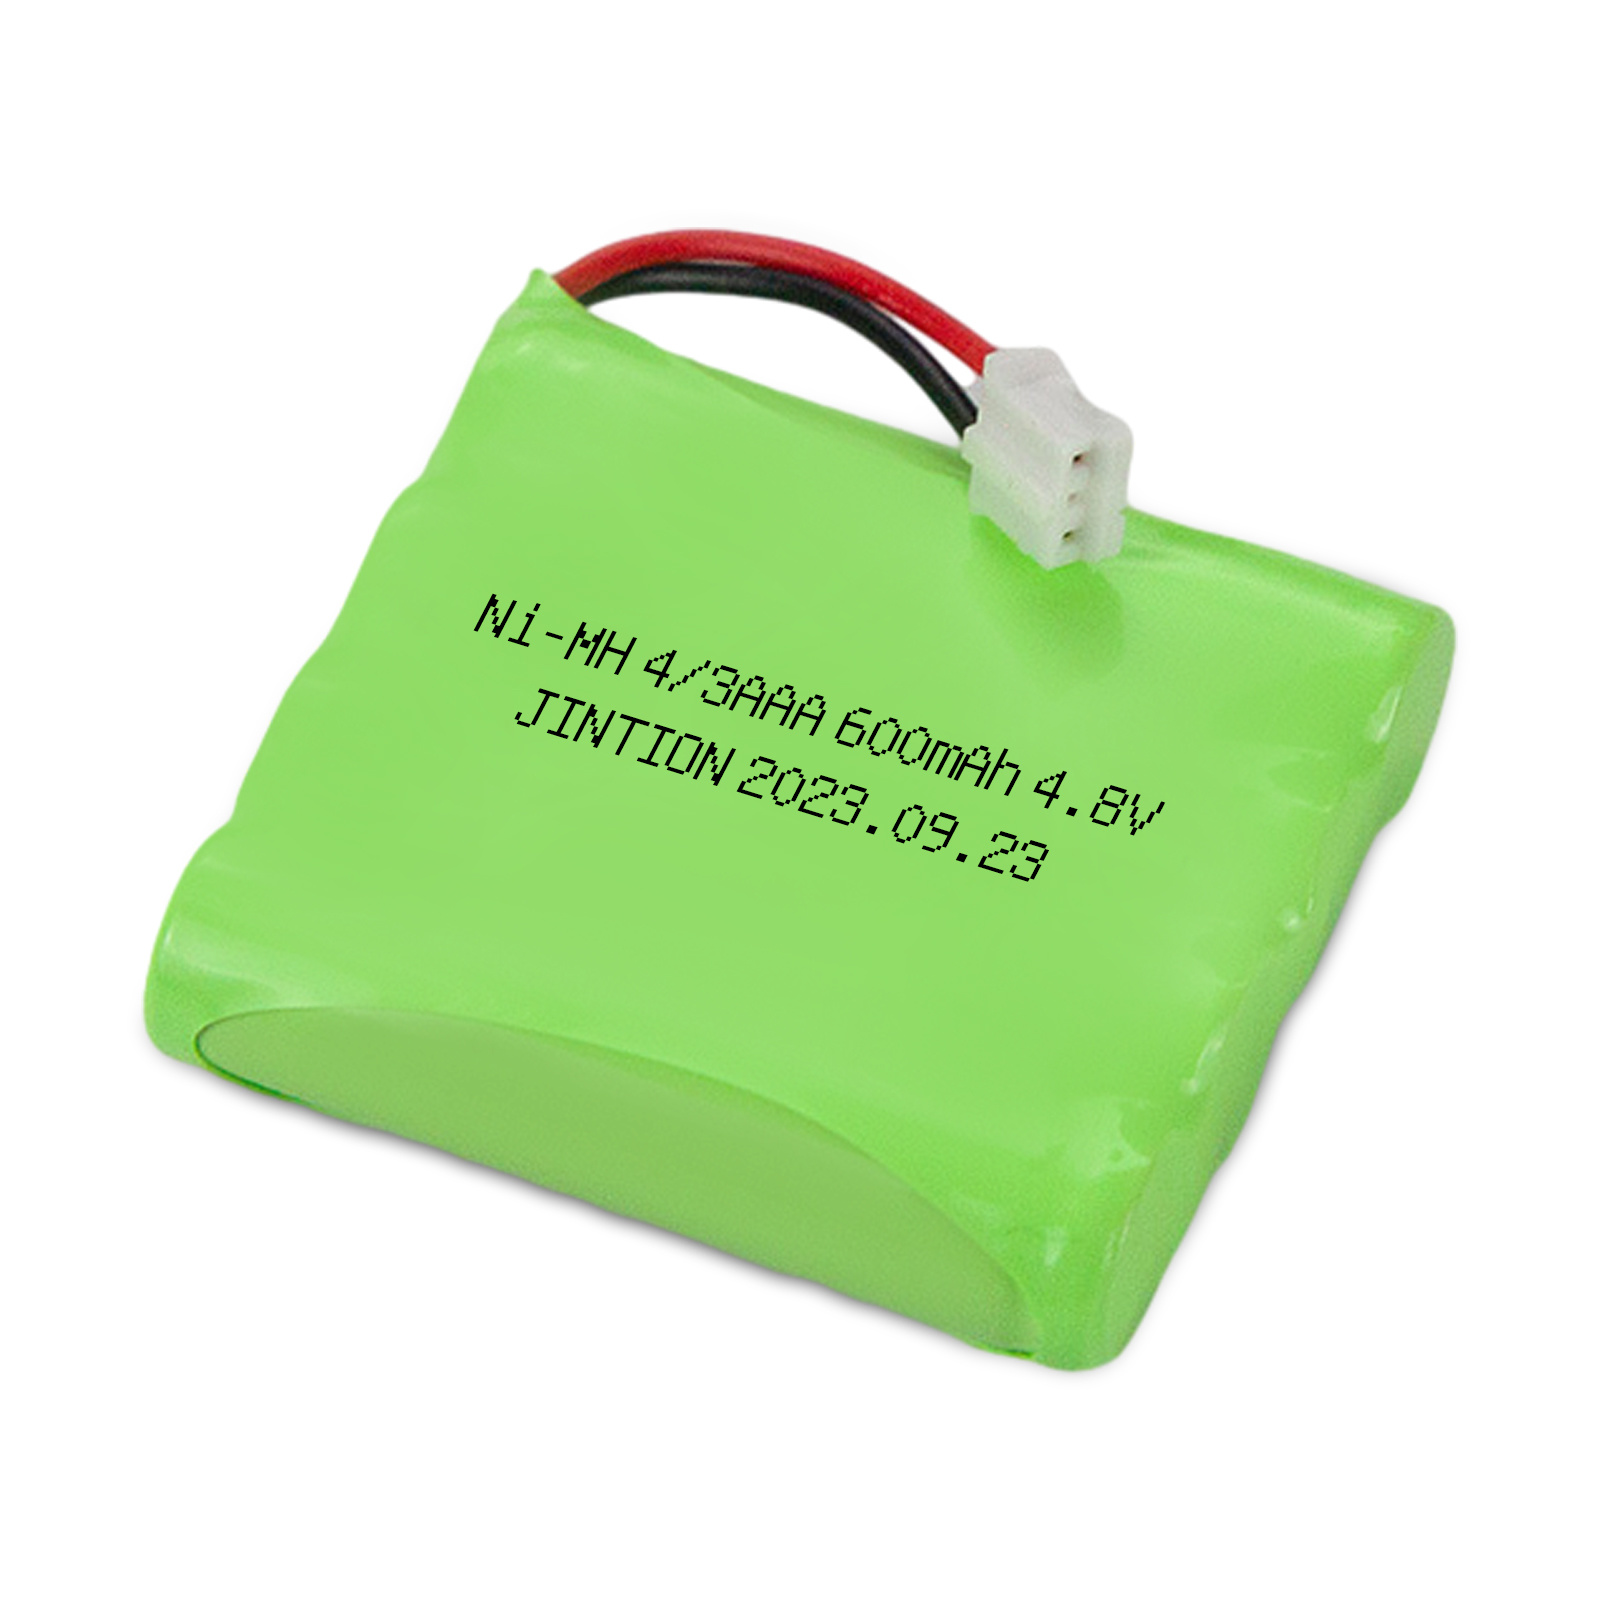 JINTION NiMh 4/3AAA 600mAh 4.8V rechargeable battery AAA rechargeable batteries